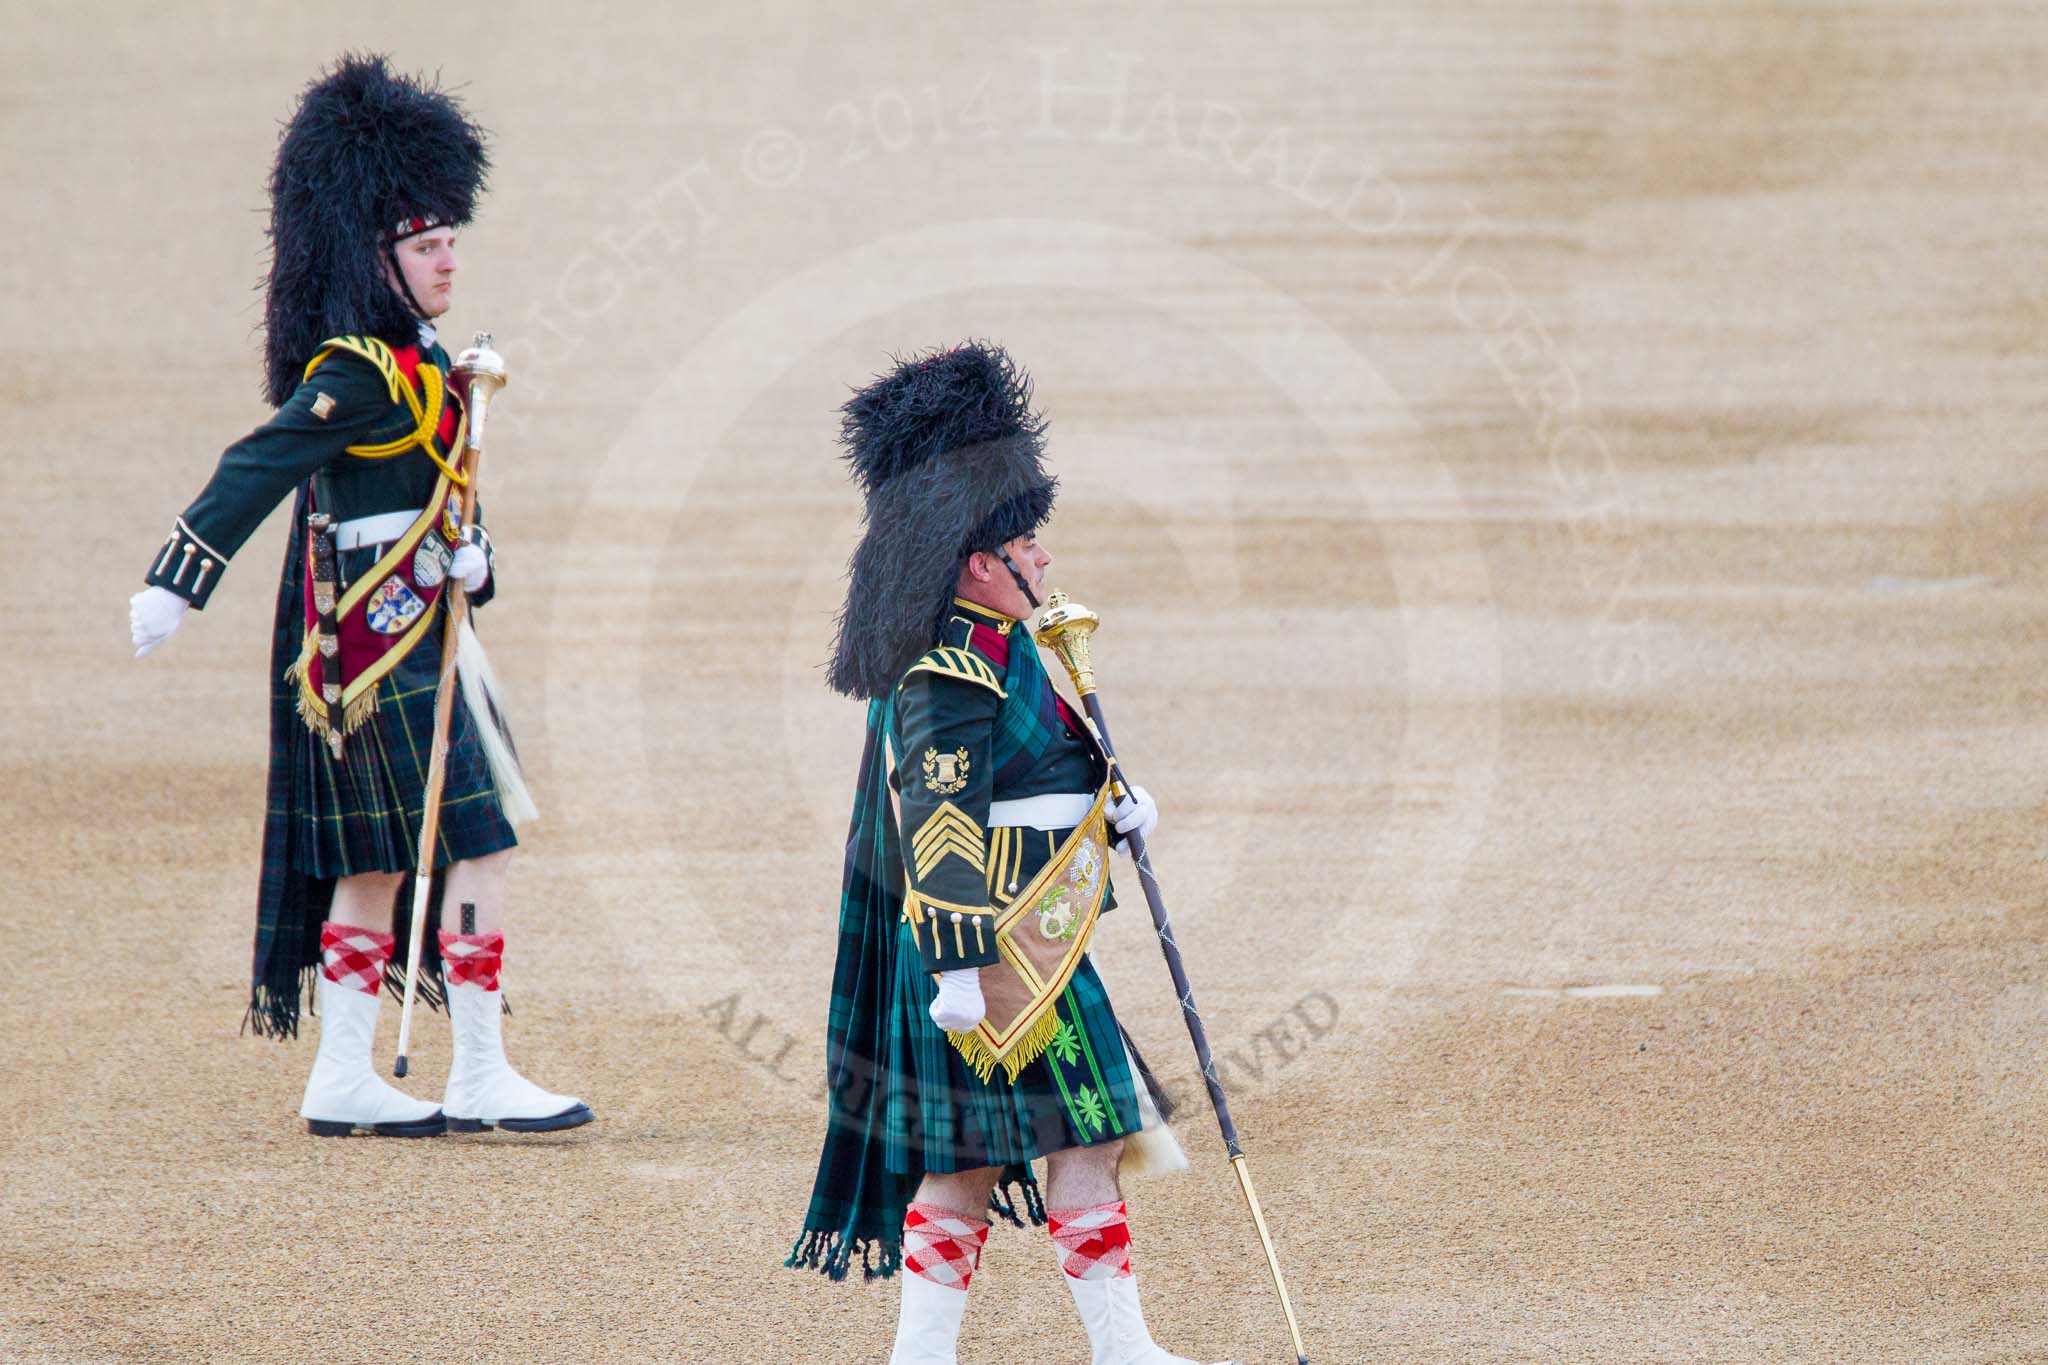 Beating Retreat 2014.
Horse Guards Parade, Westminster,
London SW1A,

United Kingdom,
on 11 June 2014 at 19:51, image #13